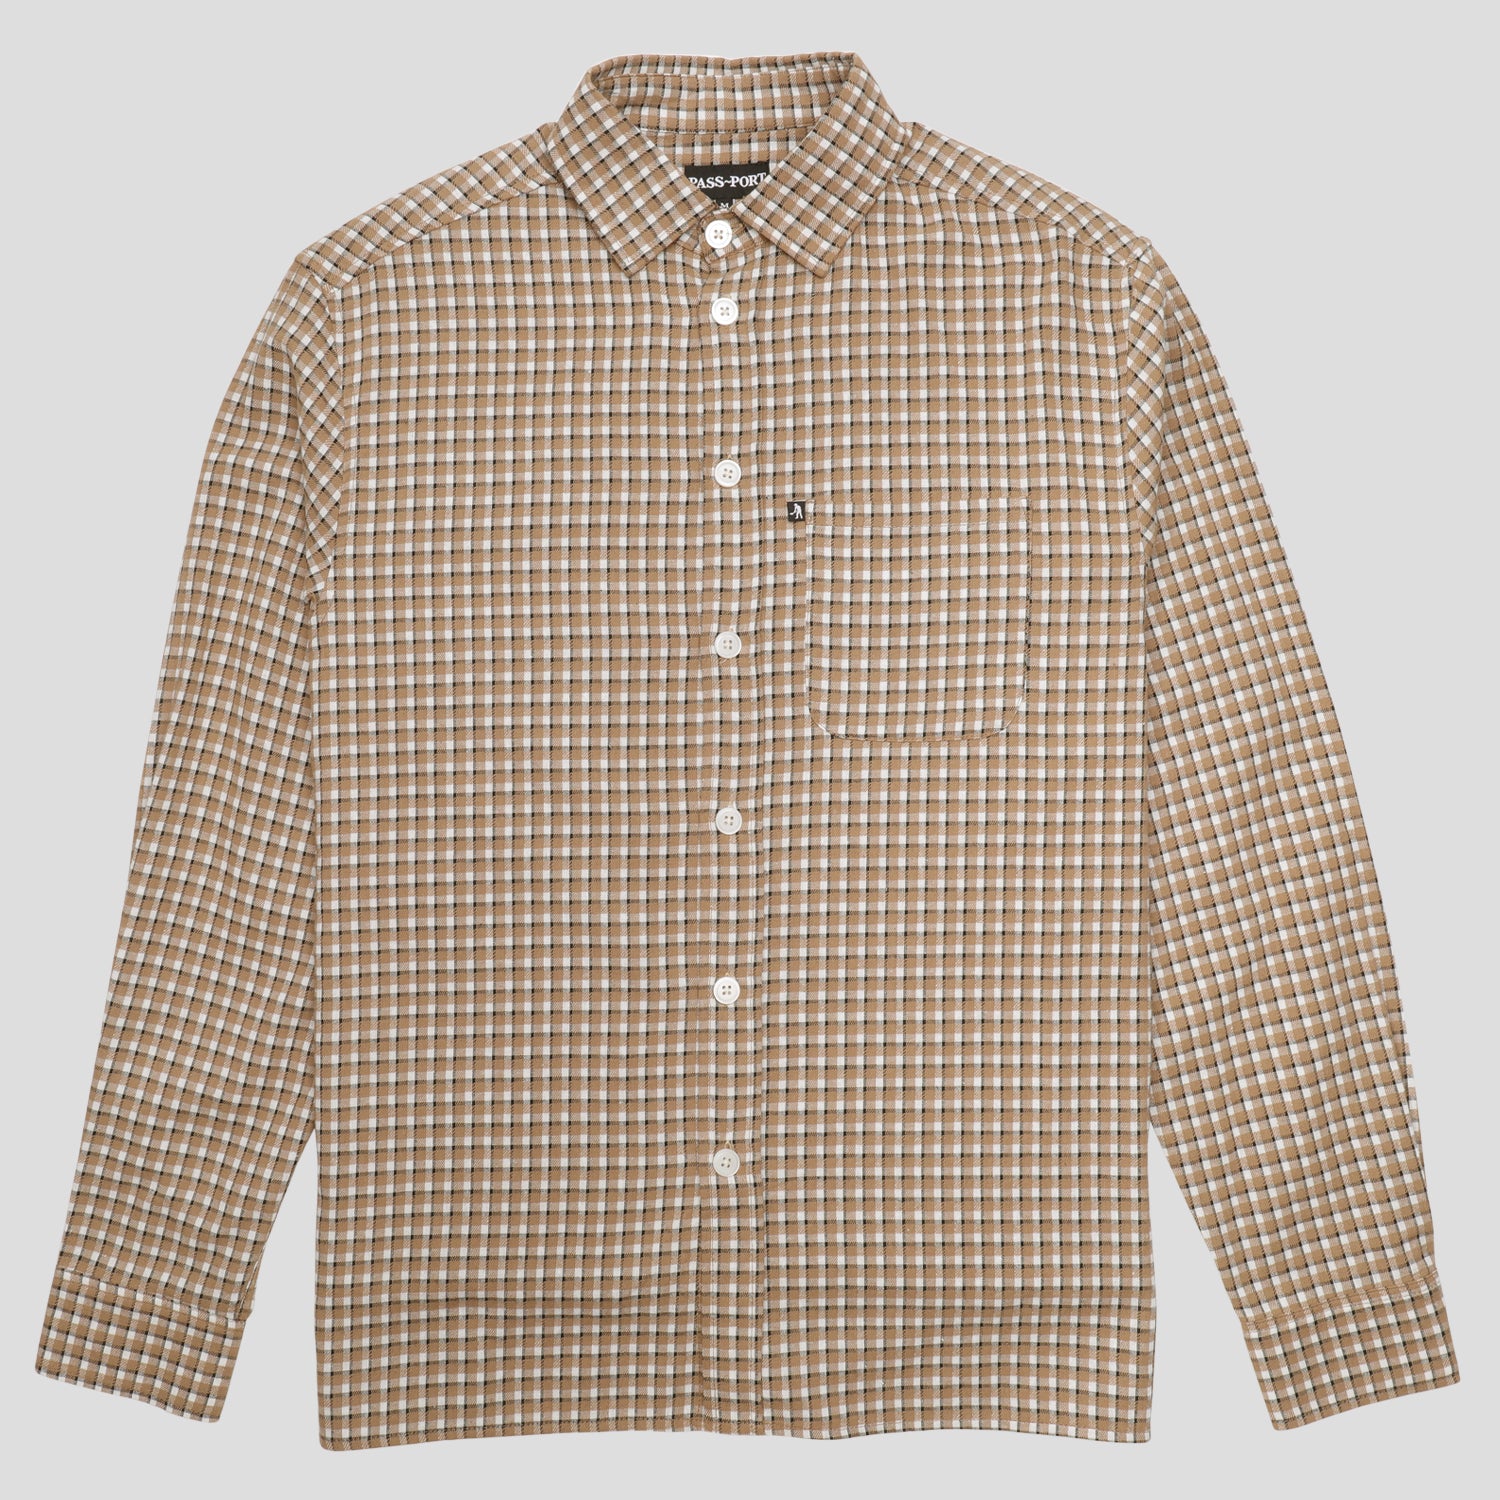 Pass~Port Workers Check Shirt Long Sleeve - Sand